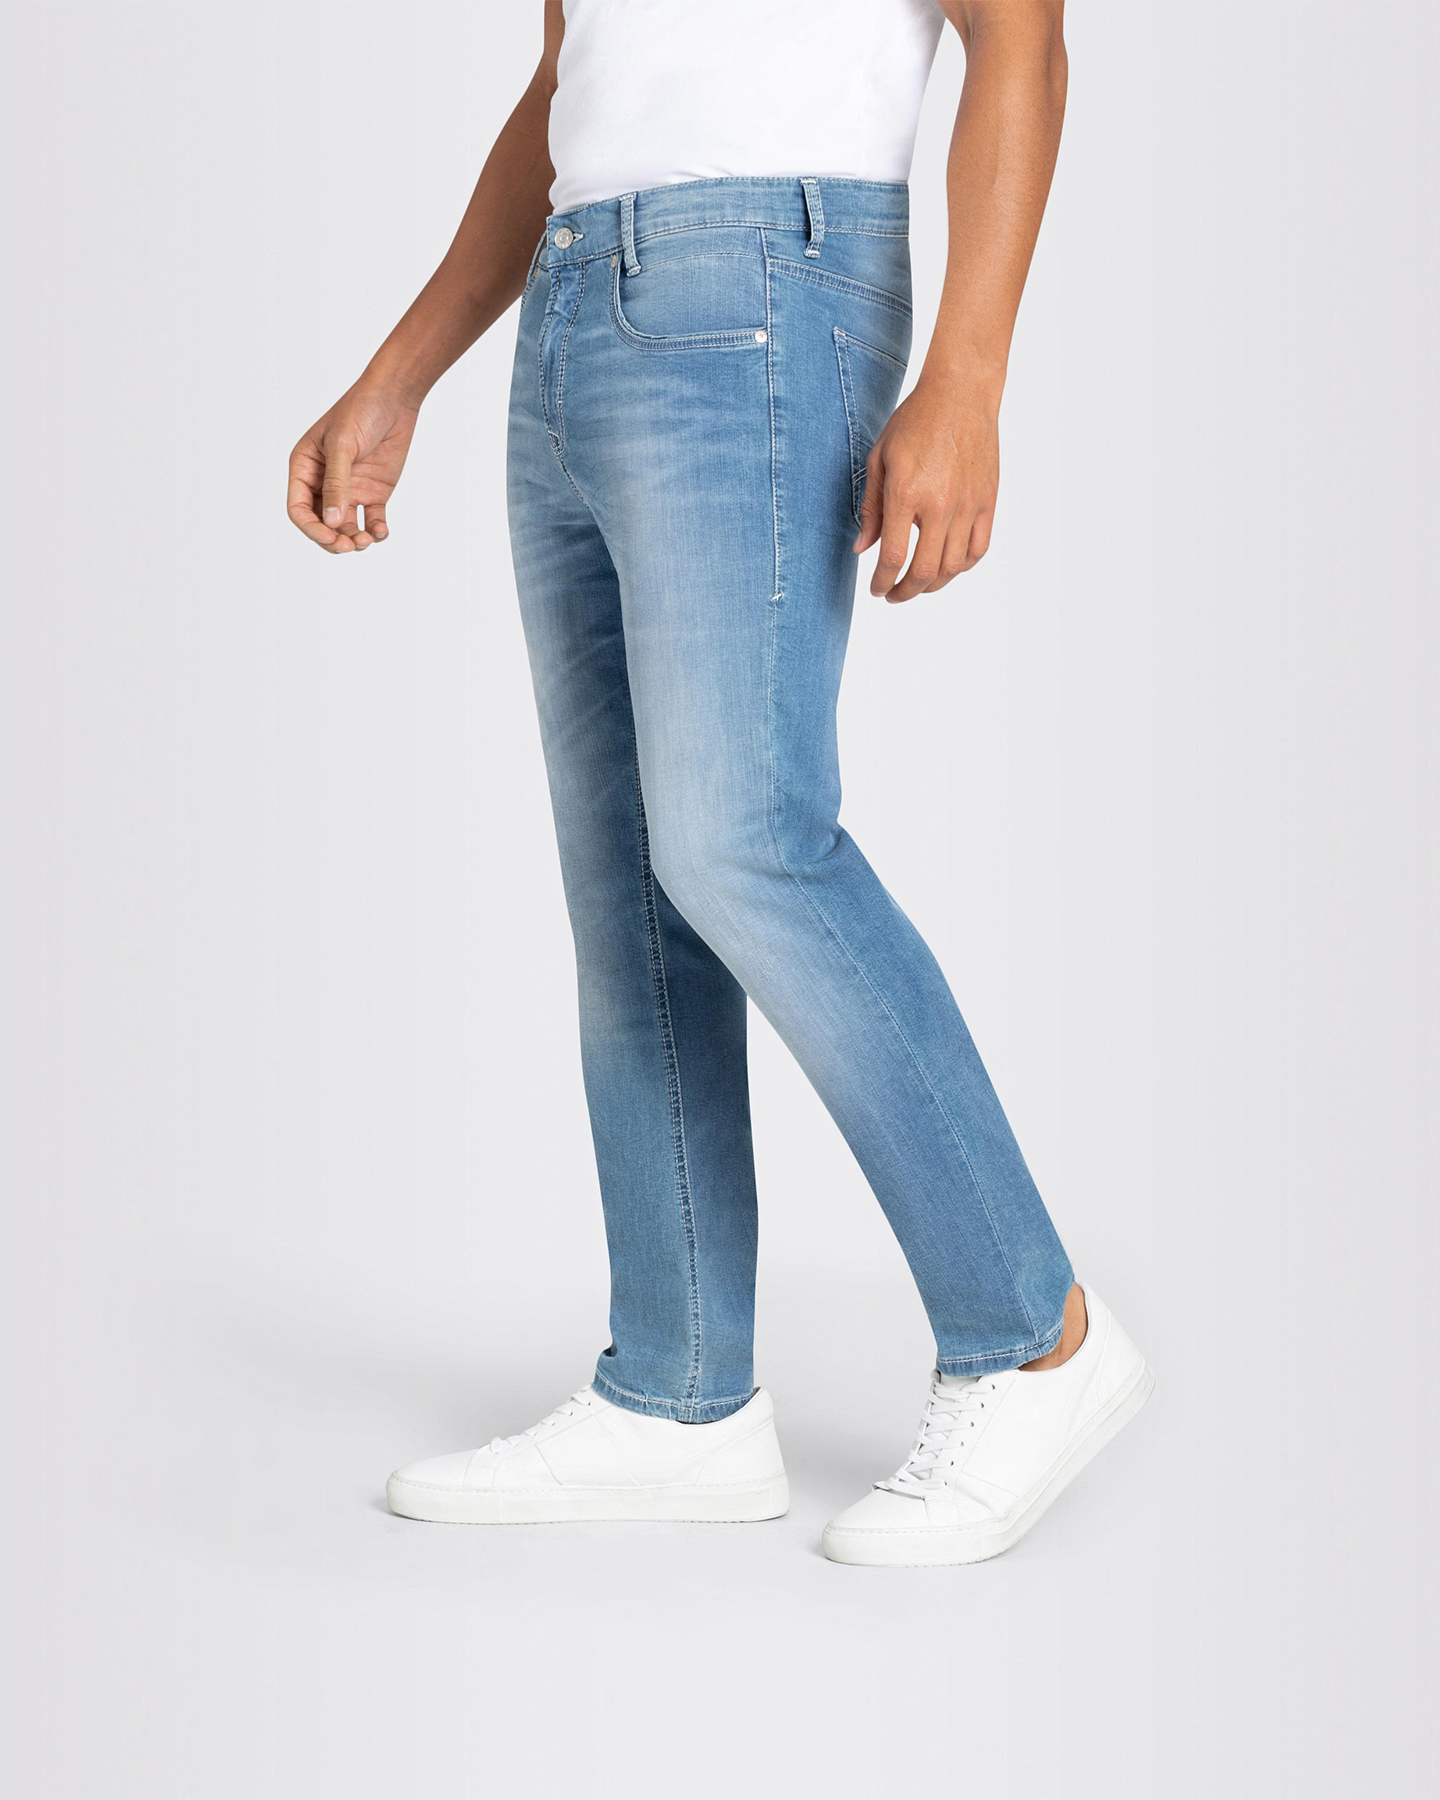 ARNE PIPE LIGHT WEIGHT JEANS - LIGHT BLUE AUTHENTIC